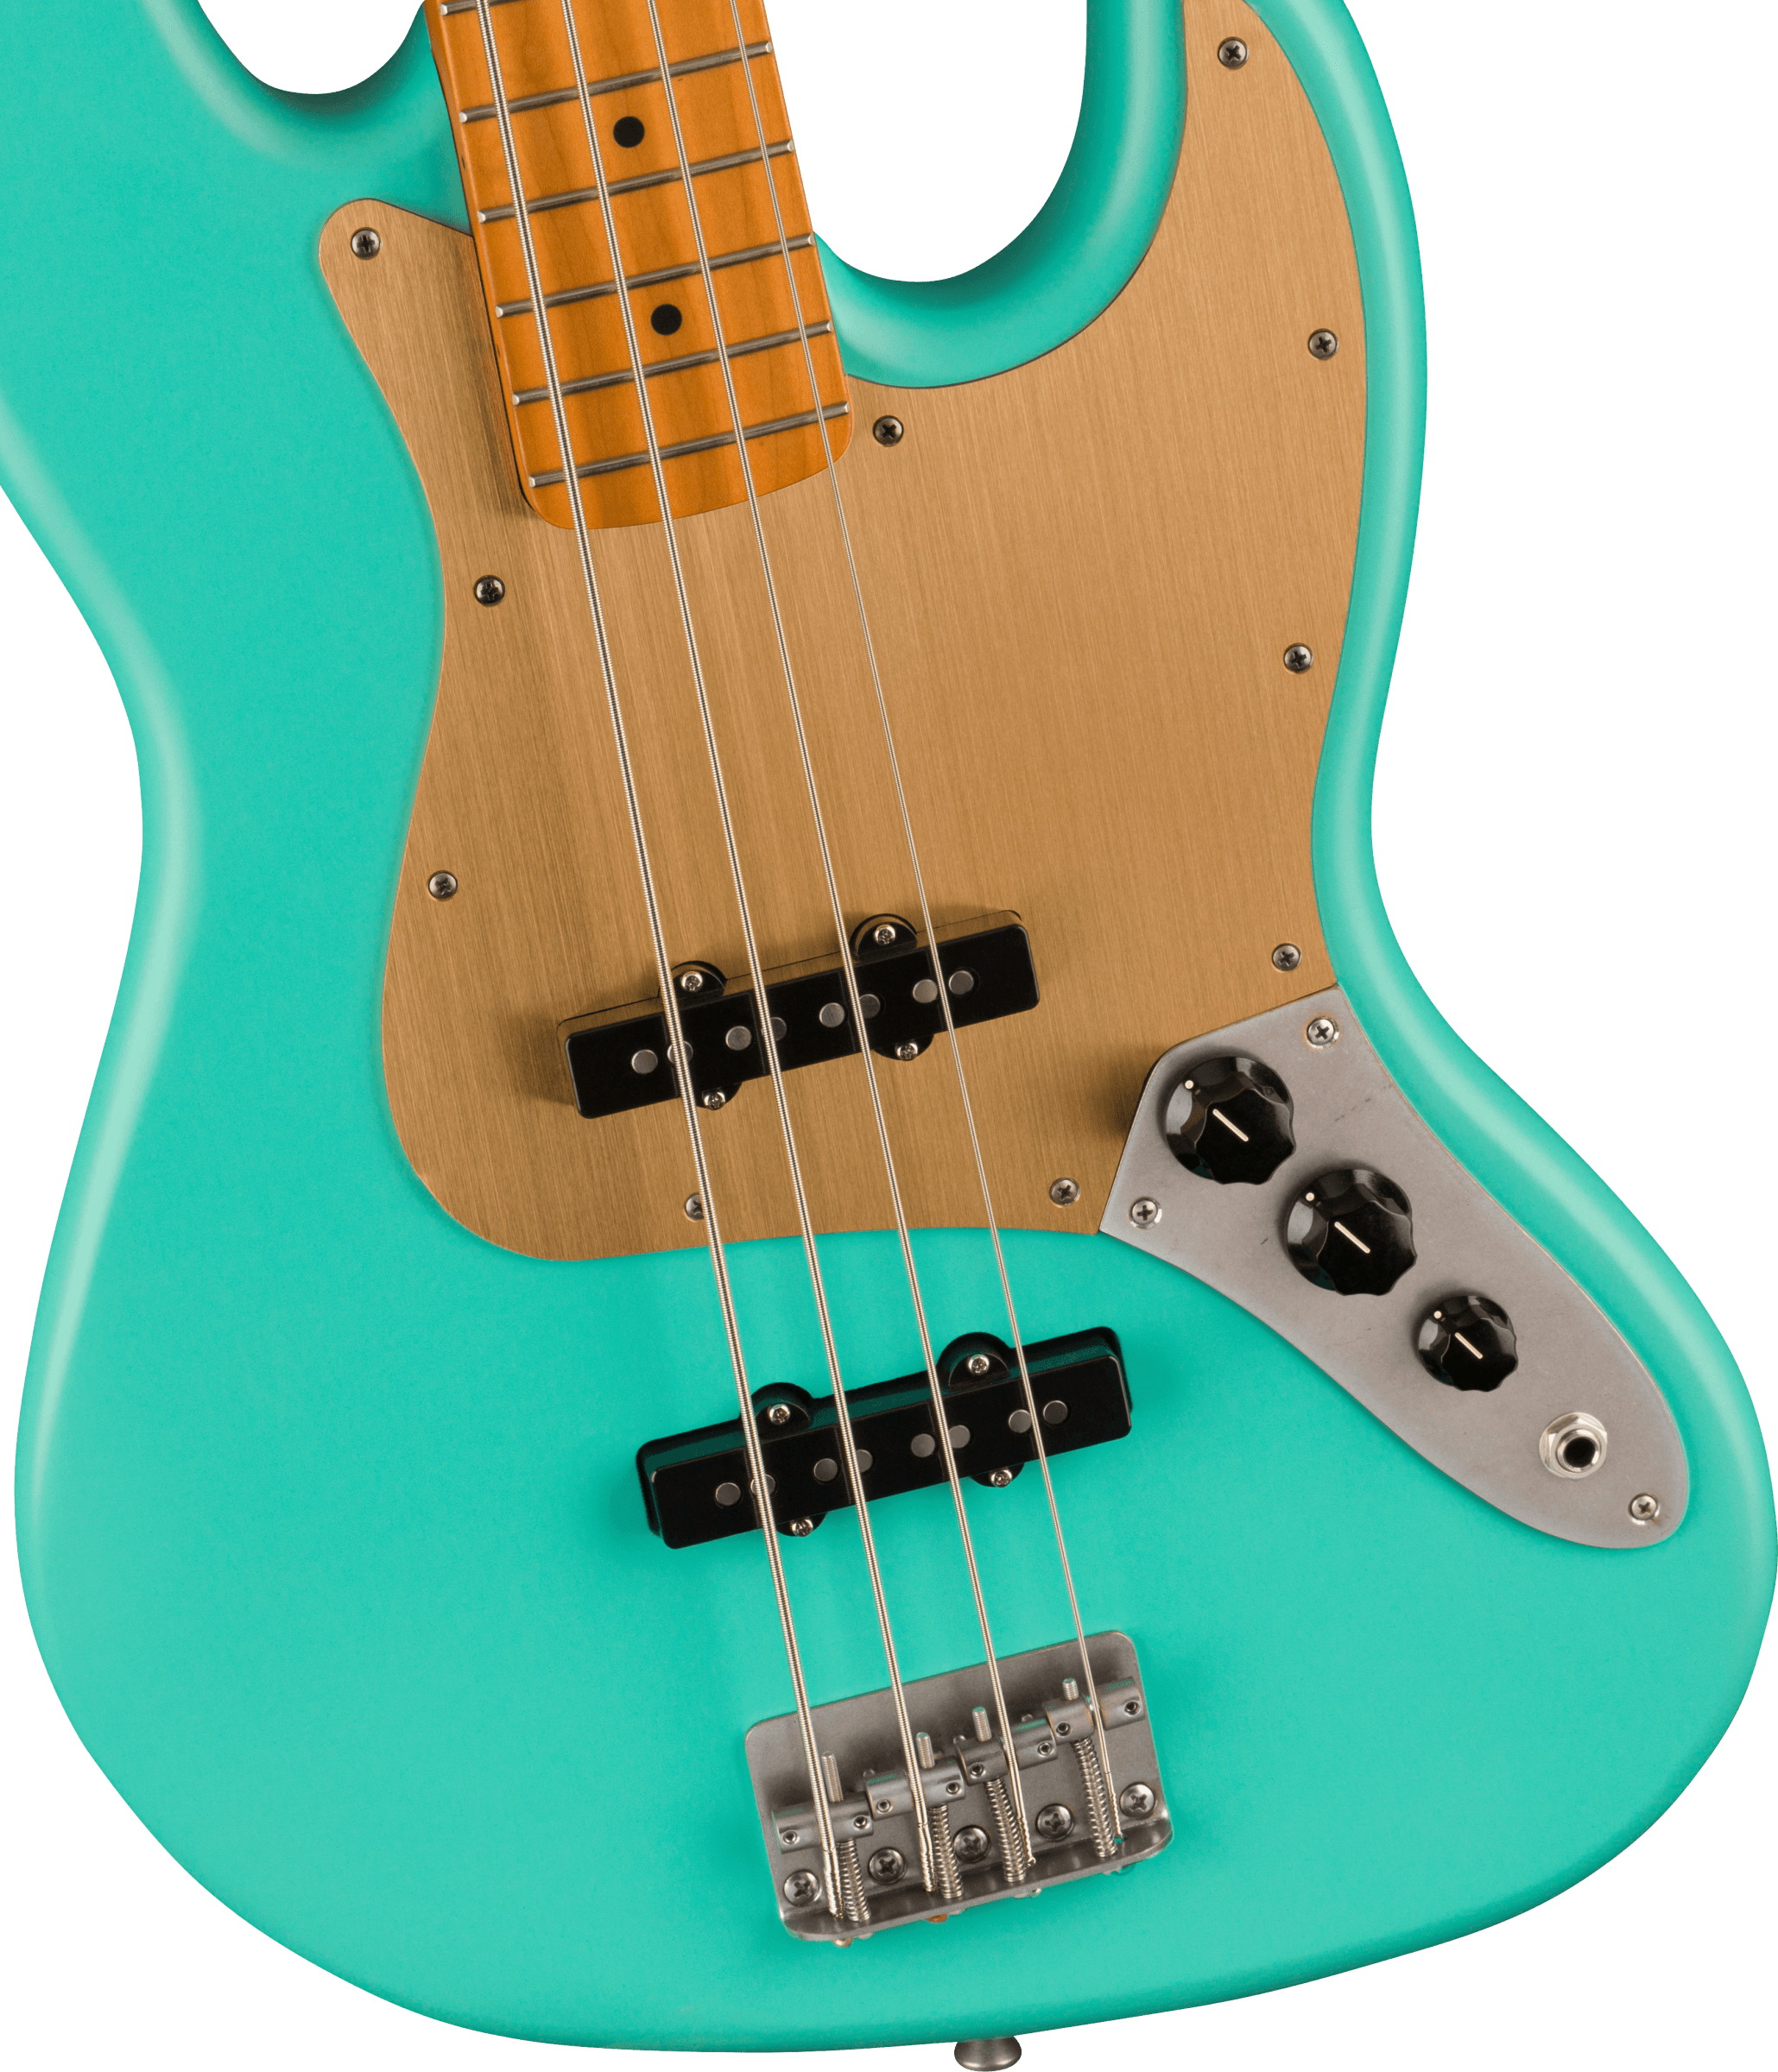 Squier Jazz Bass 40th Anniversary Gold Edition Mn - Satin Seafoam Green - Basse Électrique Solid Body - Variation 2